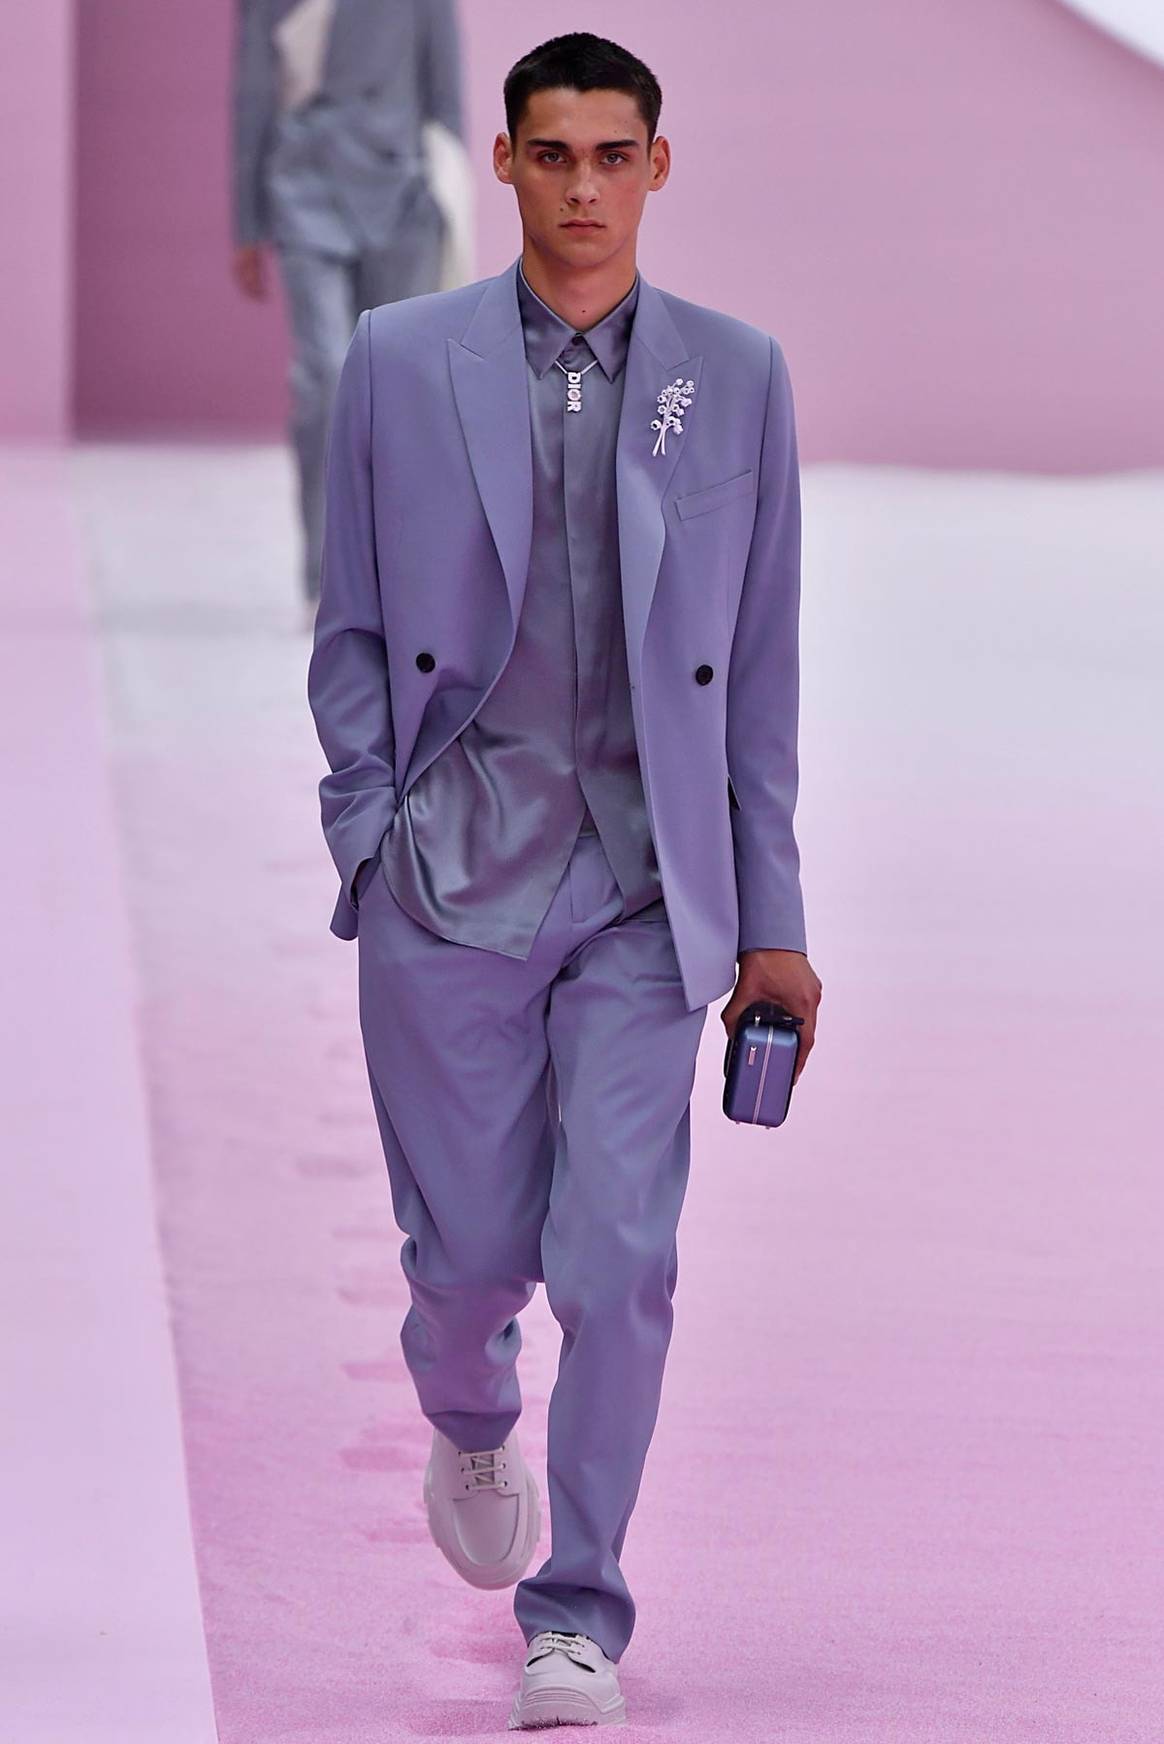 Bright colors and tailored suits march on the Dior and Berluti men's runways